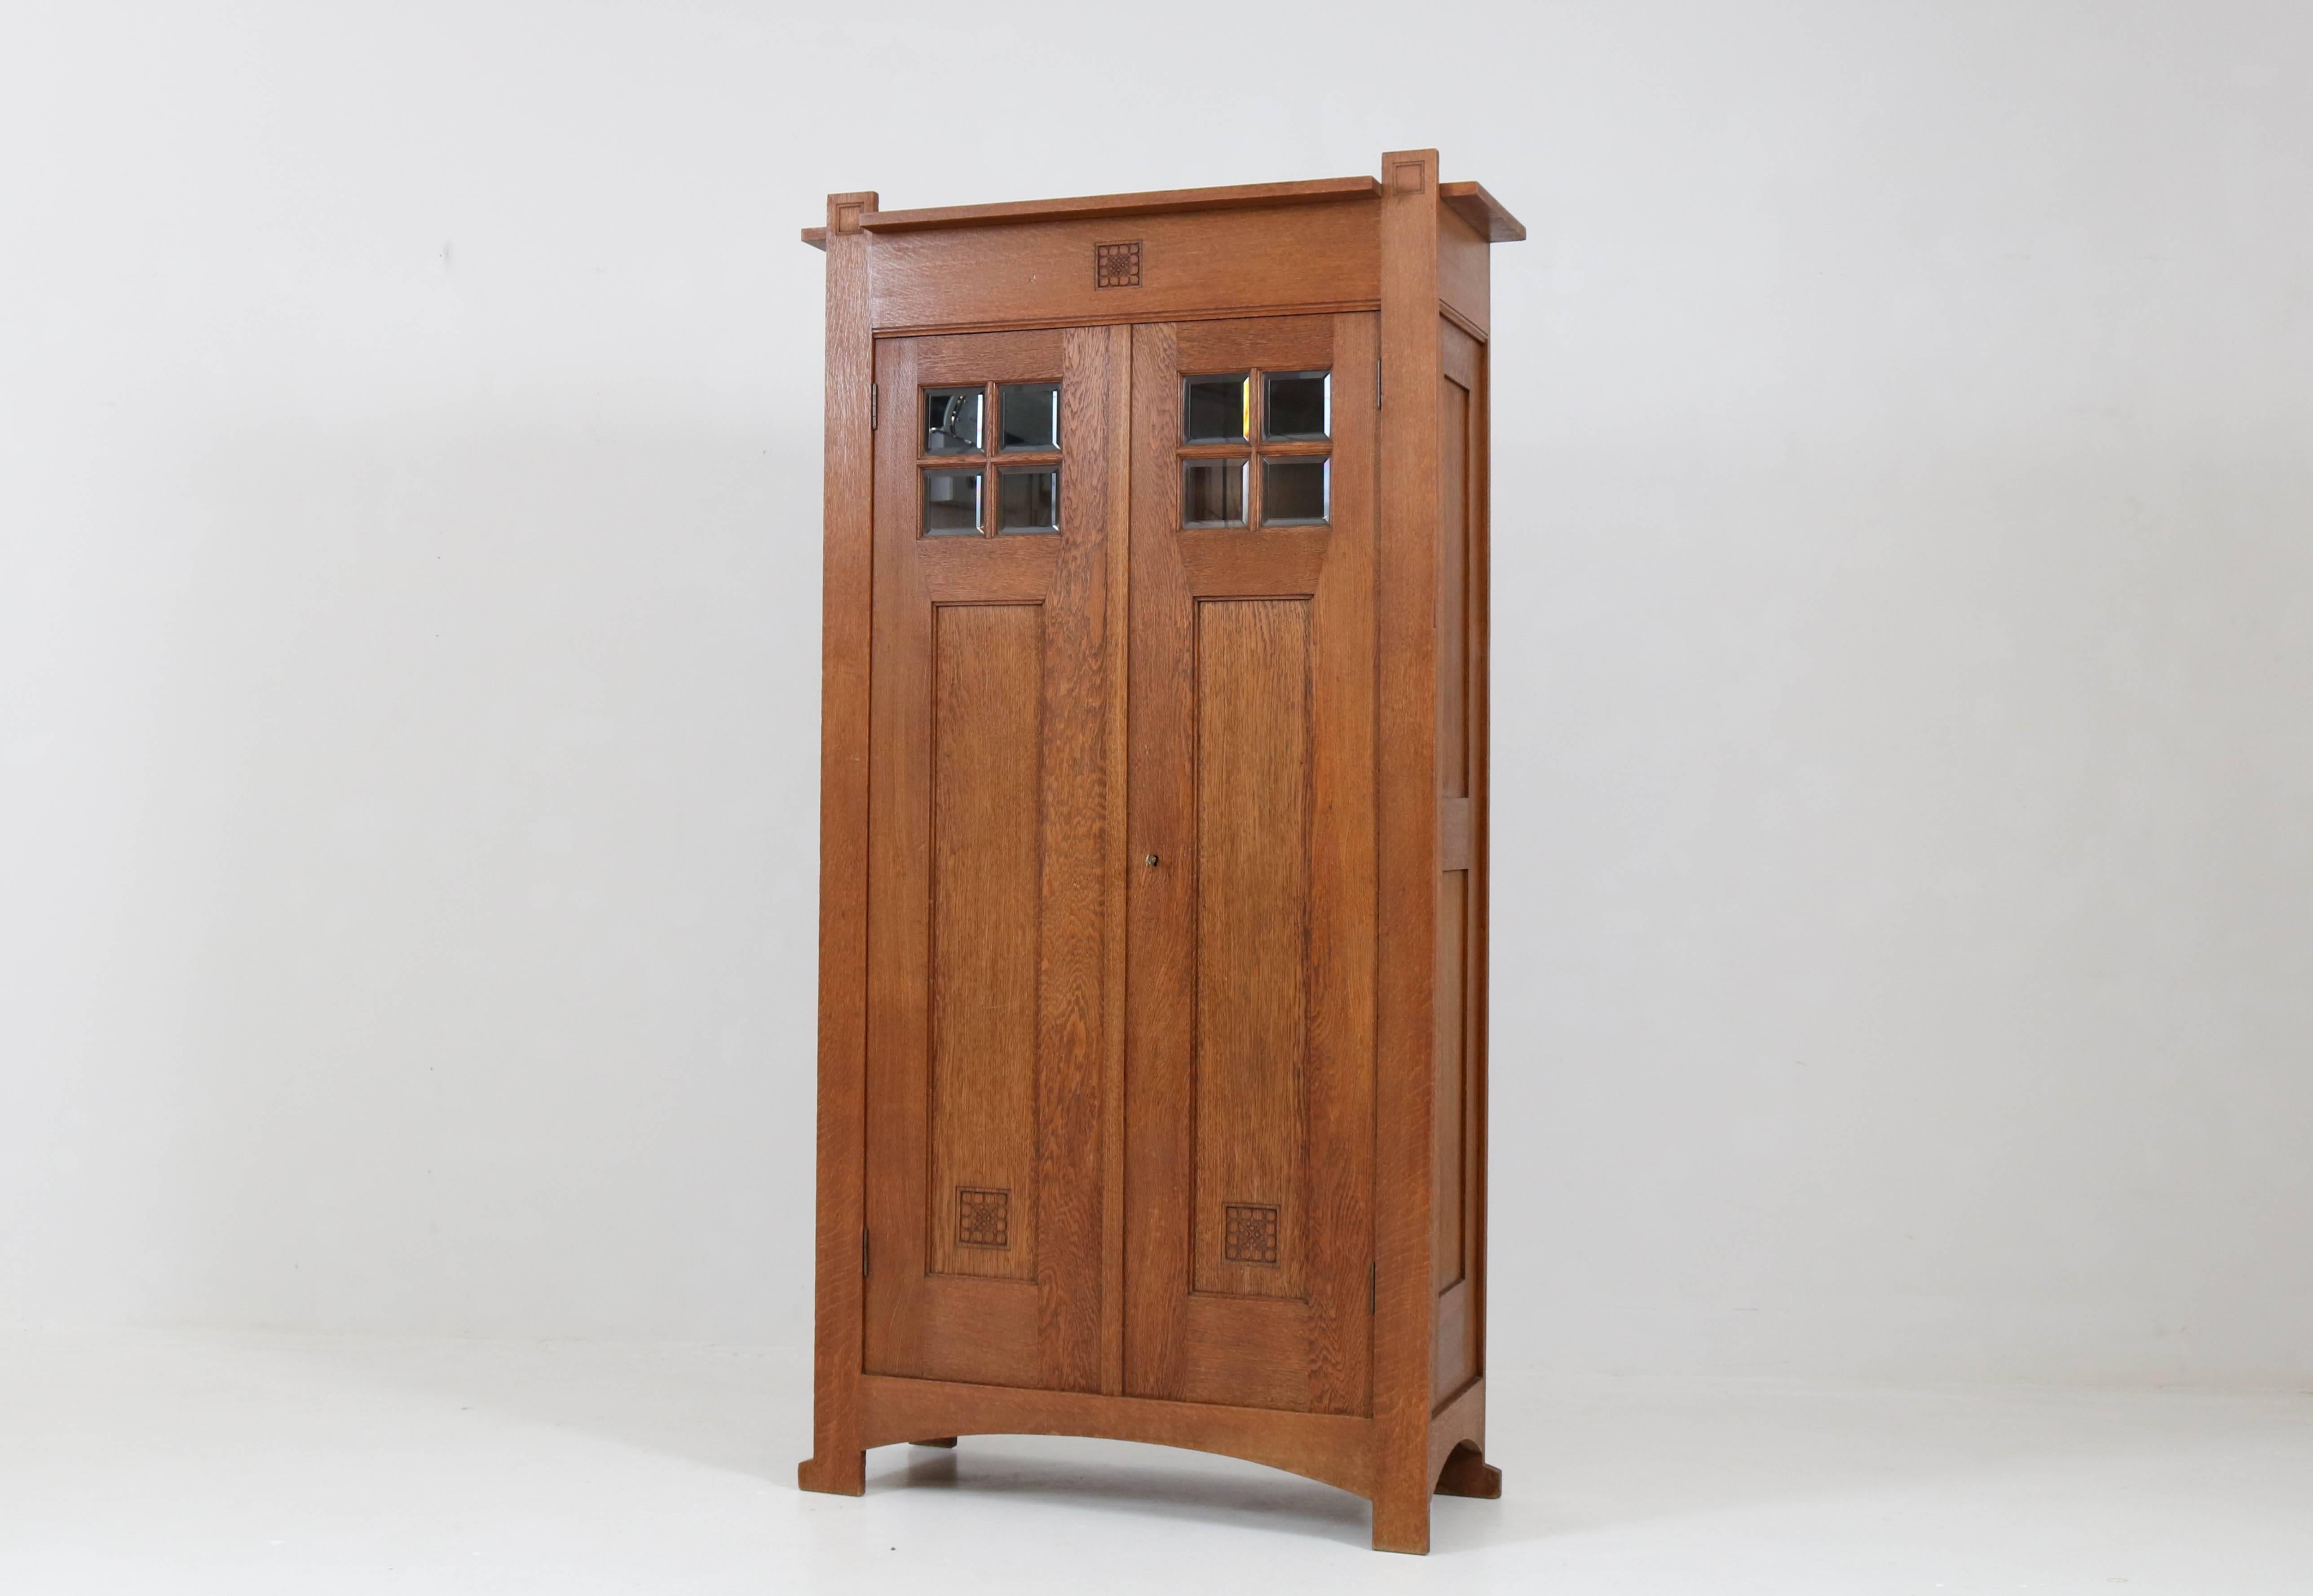 Offered by Amsterdam Modernism:
Rare and hard to find Art Nouveau Arts & Crafts armoir by Willem Penaat for
Fa.Haag & Zn Amsterdam.
Striking Dutch design from the 1890s.
Solid oak with four original wooden shelves.
Marked on the original key.
Please